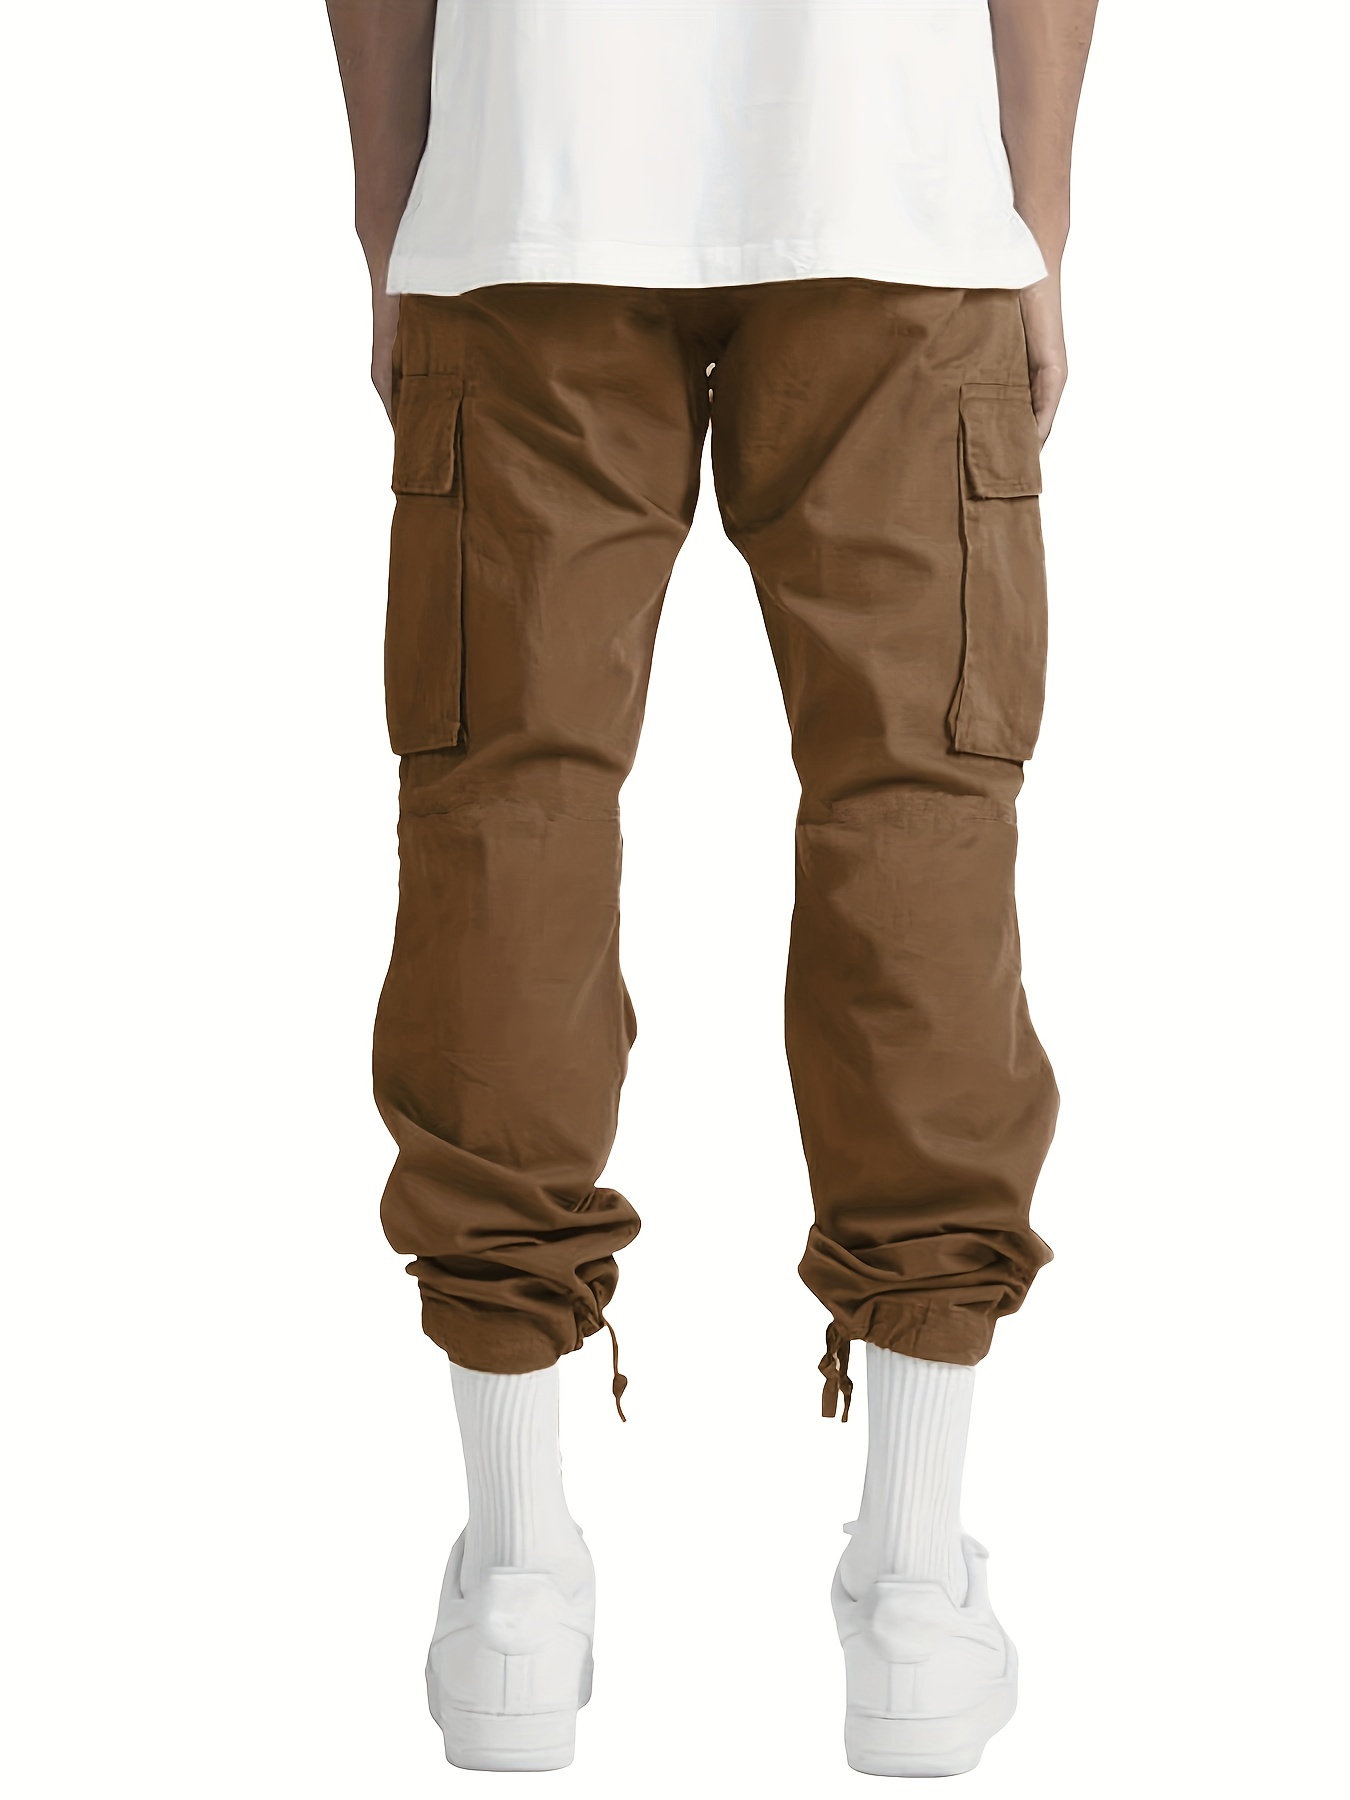 Comdecevis Mens Cargo Pants Casual Joggers Cotton Drawstring Sweatpants  with 6 Pockets Hiking Outdoor Twill Track Pants